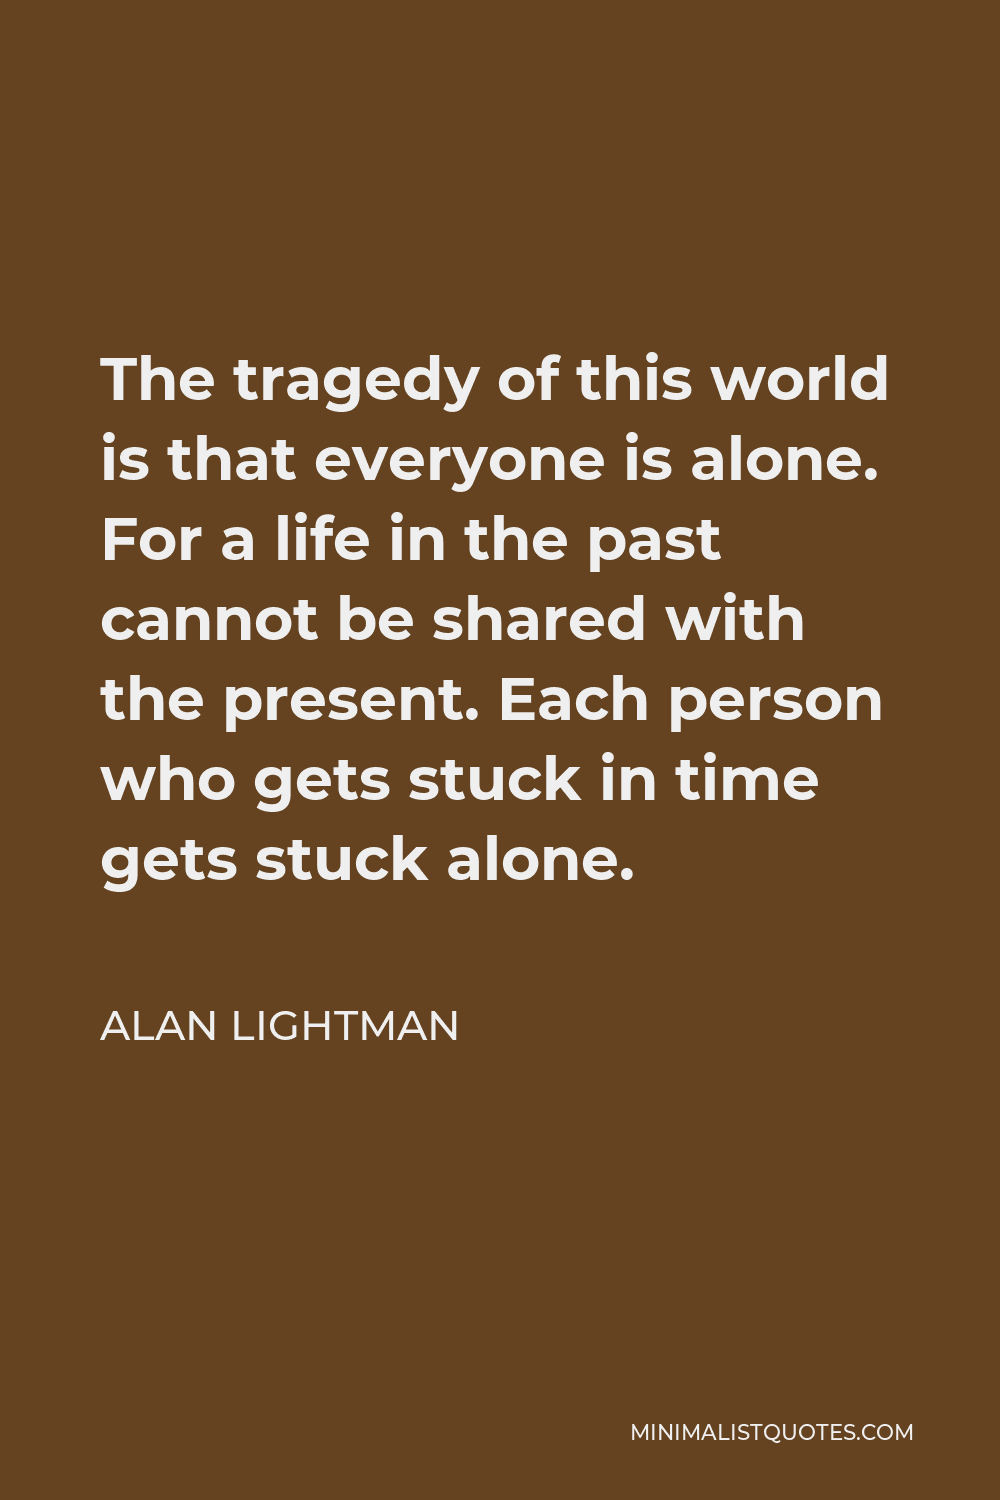 Alan Lightman Quote - The tragedy of this world is that everyone is alone. For a life in the past cannot be shared with the present. Each person who gets stuck in time gets stuck alone.